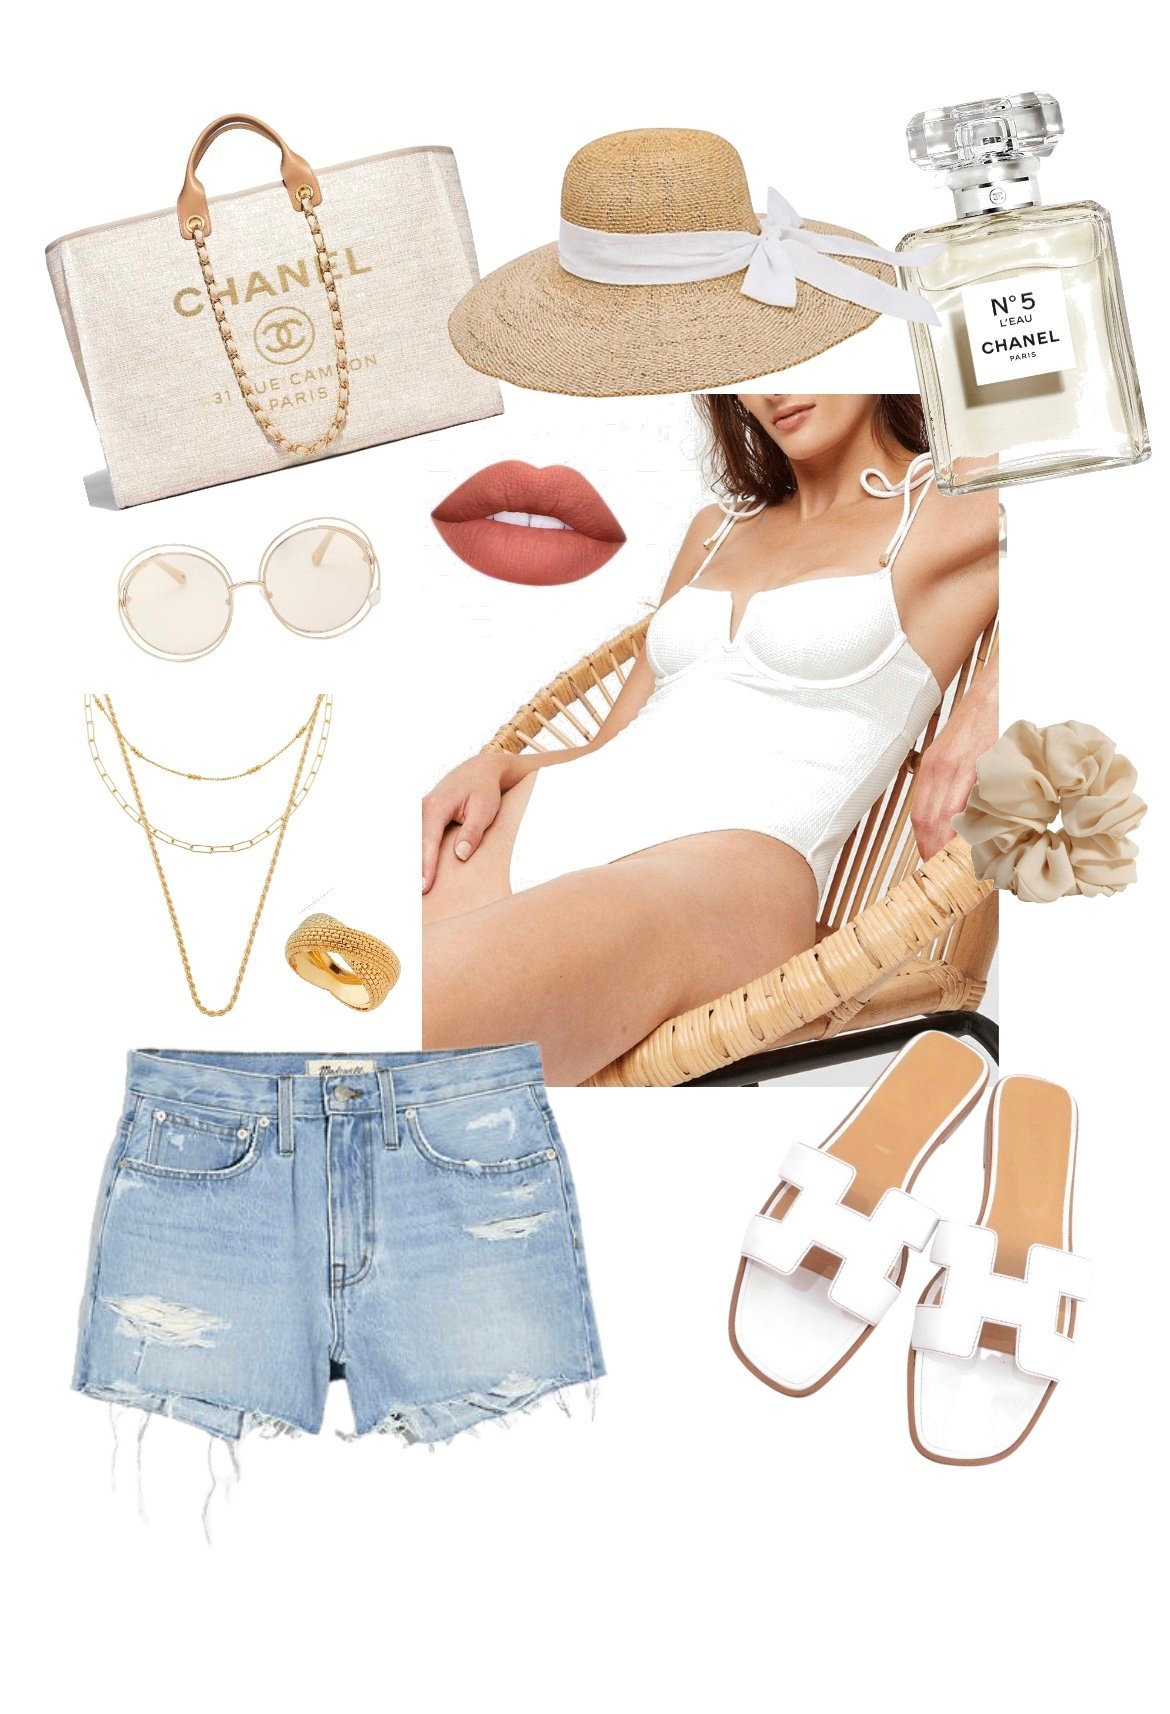 What to wear at Maldives? What to pack for Maldives? Shorts and swimwear outfit idea for a beach vacation. Beach wear ideas. White swimsuit 